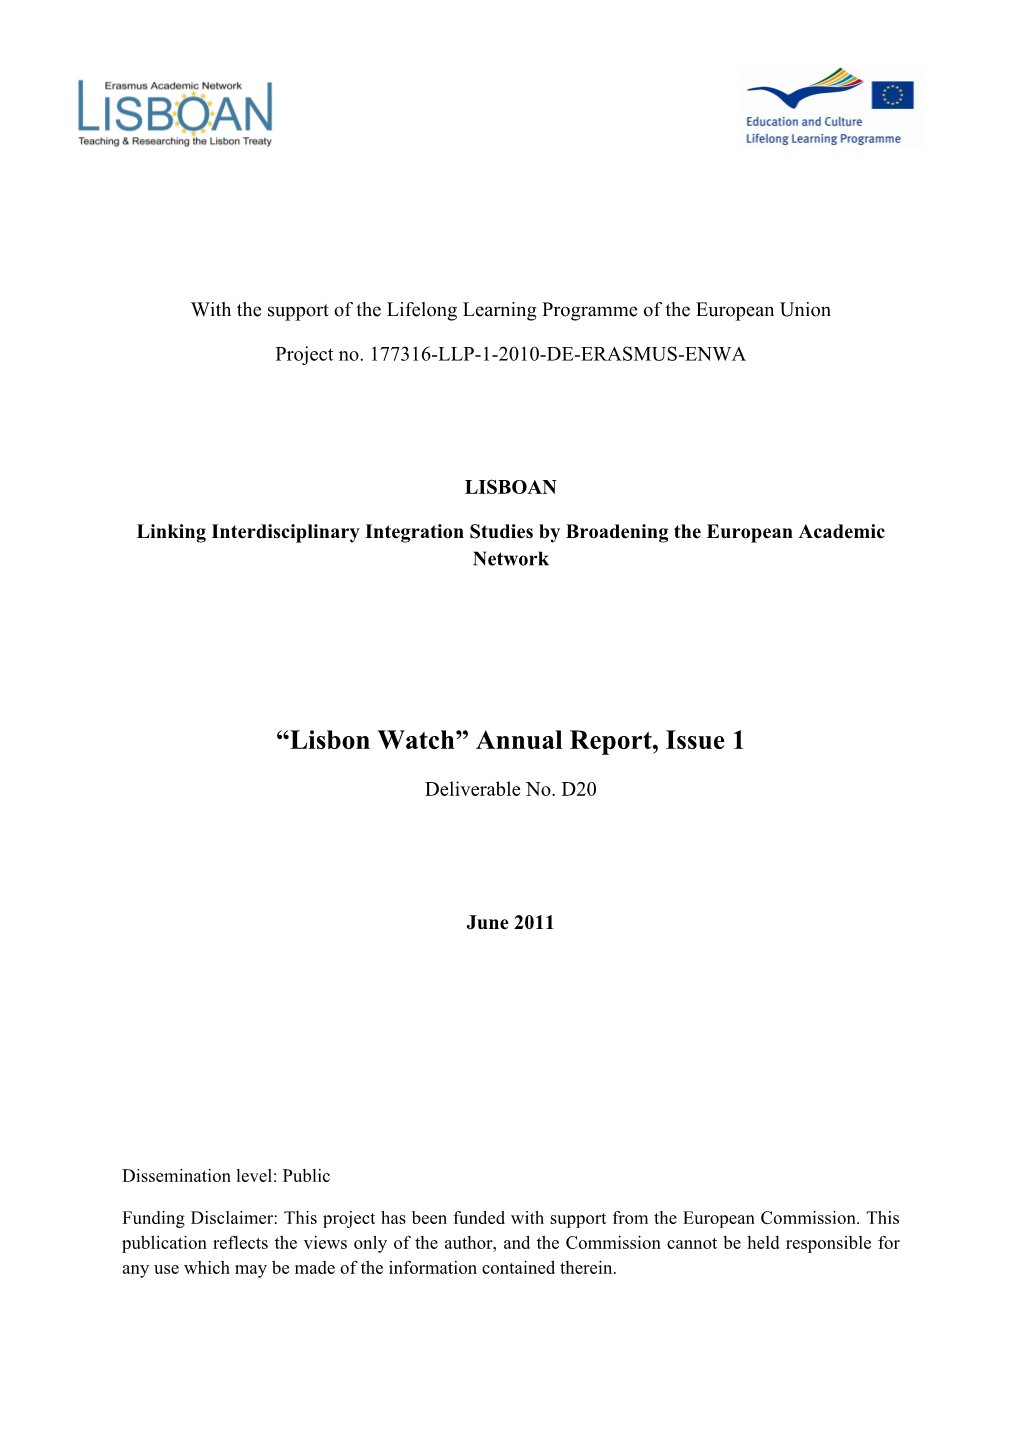 Lisbon Watch” Annual Report, Issue 1